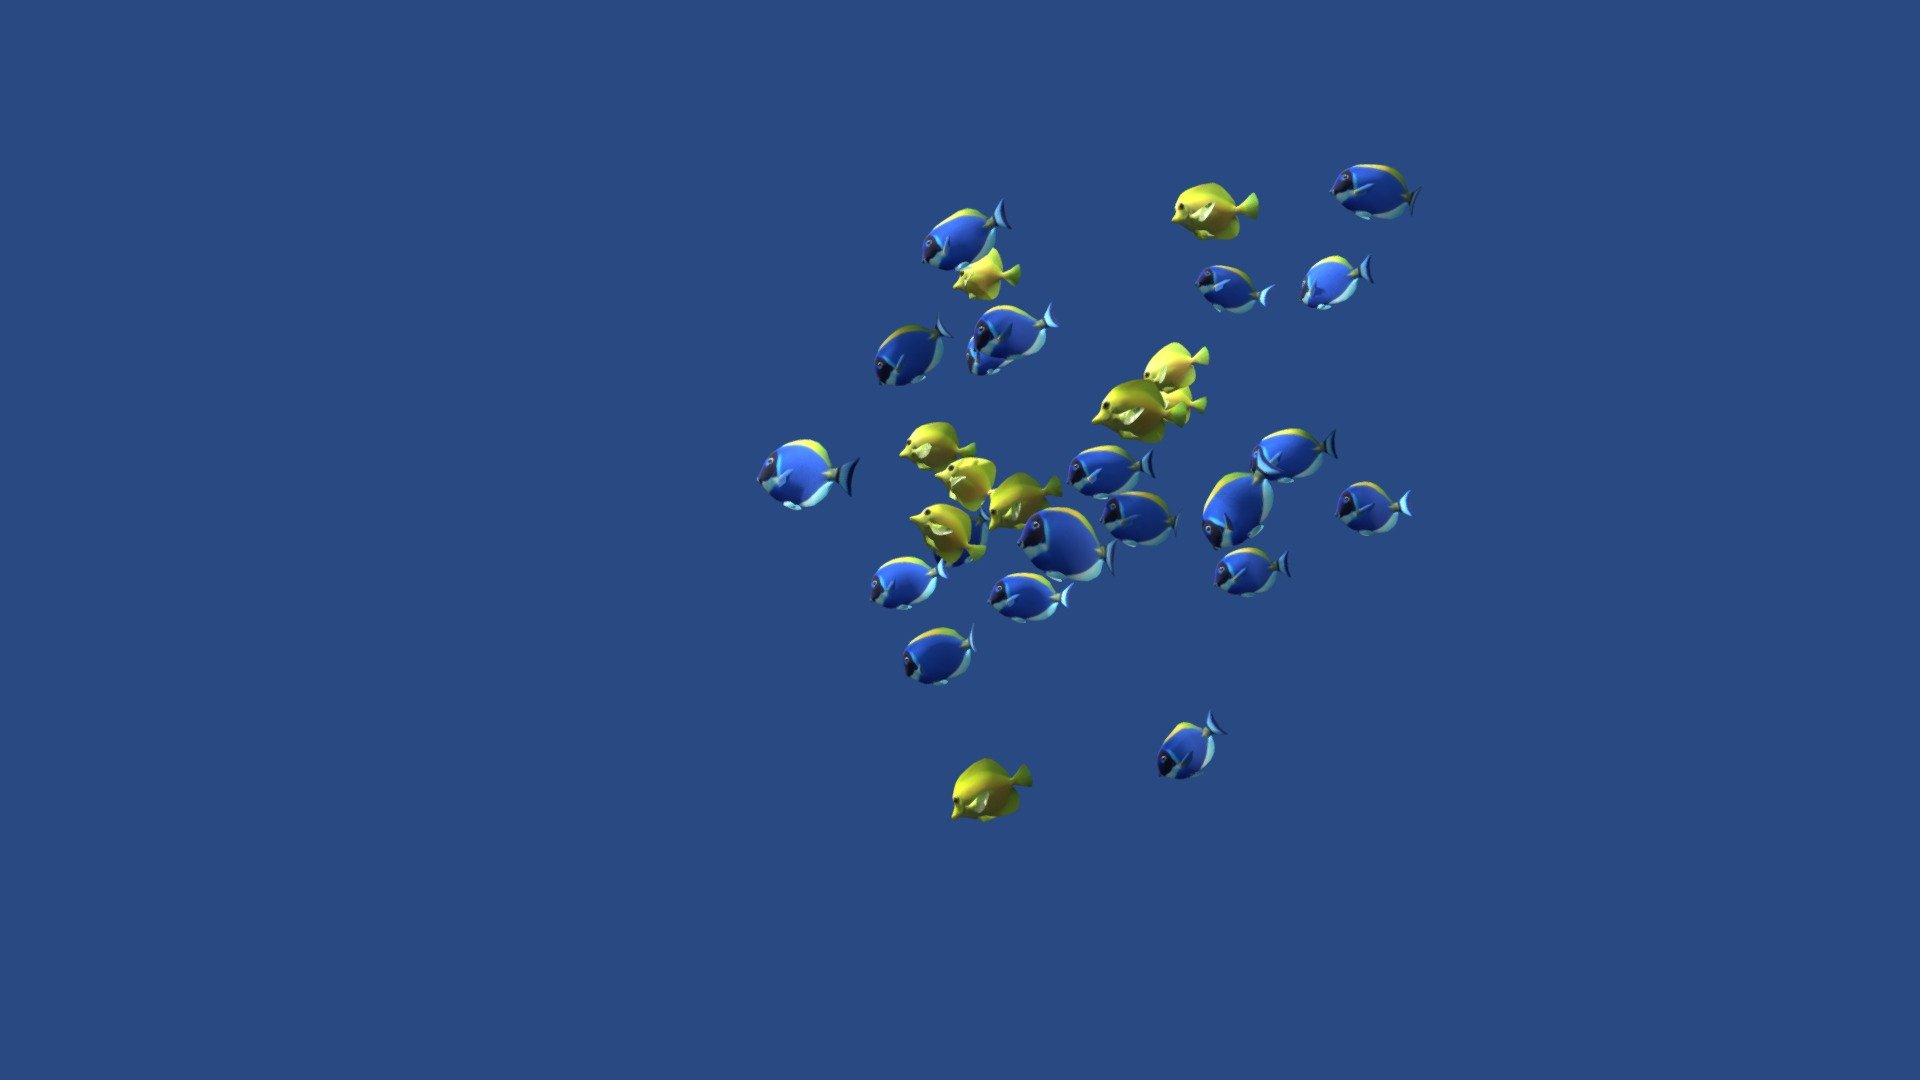 Schooling Coral Fish

Blue and Yellow Tangs

The 3D asset for Unity

Loop animation 30s



Separately fish: 

Blue Fish : https://skfb.ly/6UUYX

Yellow Fish:  https://skfb.ly/6UIBZ



You can always find my assets in the Unity store.

Just type in the search bar “CGSoul” - Schooling Fish Blue and Yellow Tangs - 3D model by Mikhail Nesterov (@cgsoul) 3d model